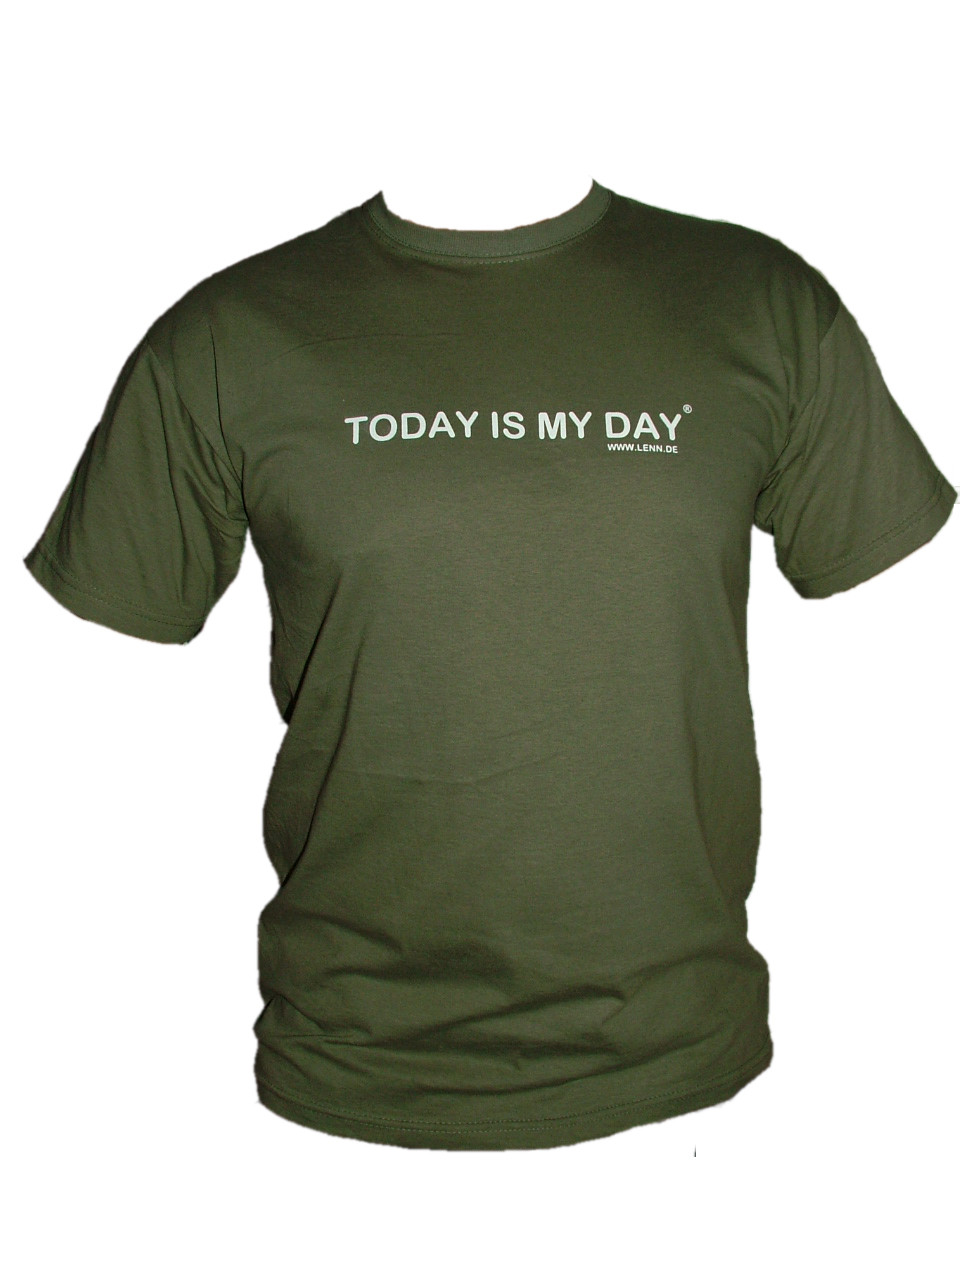 Today Is My Day - Shirt (Male)